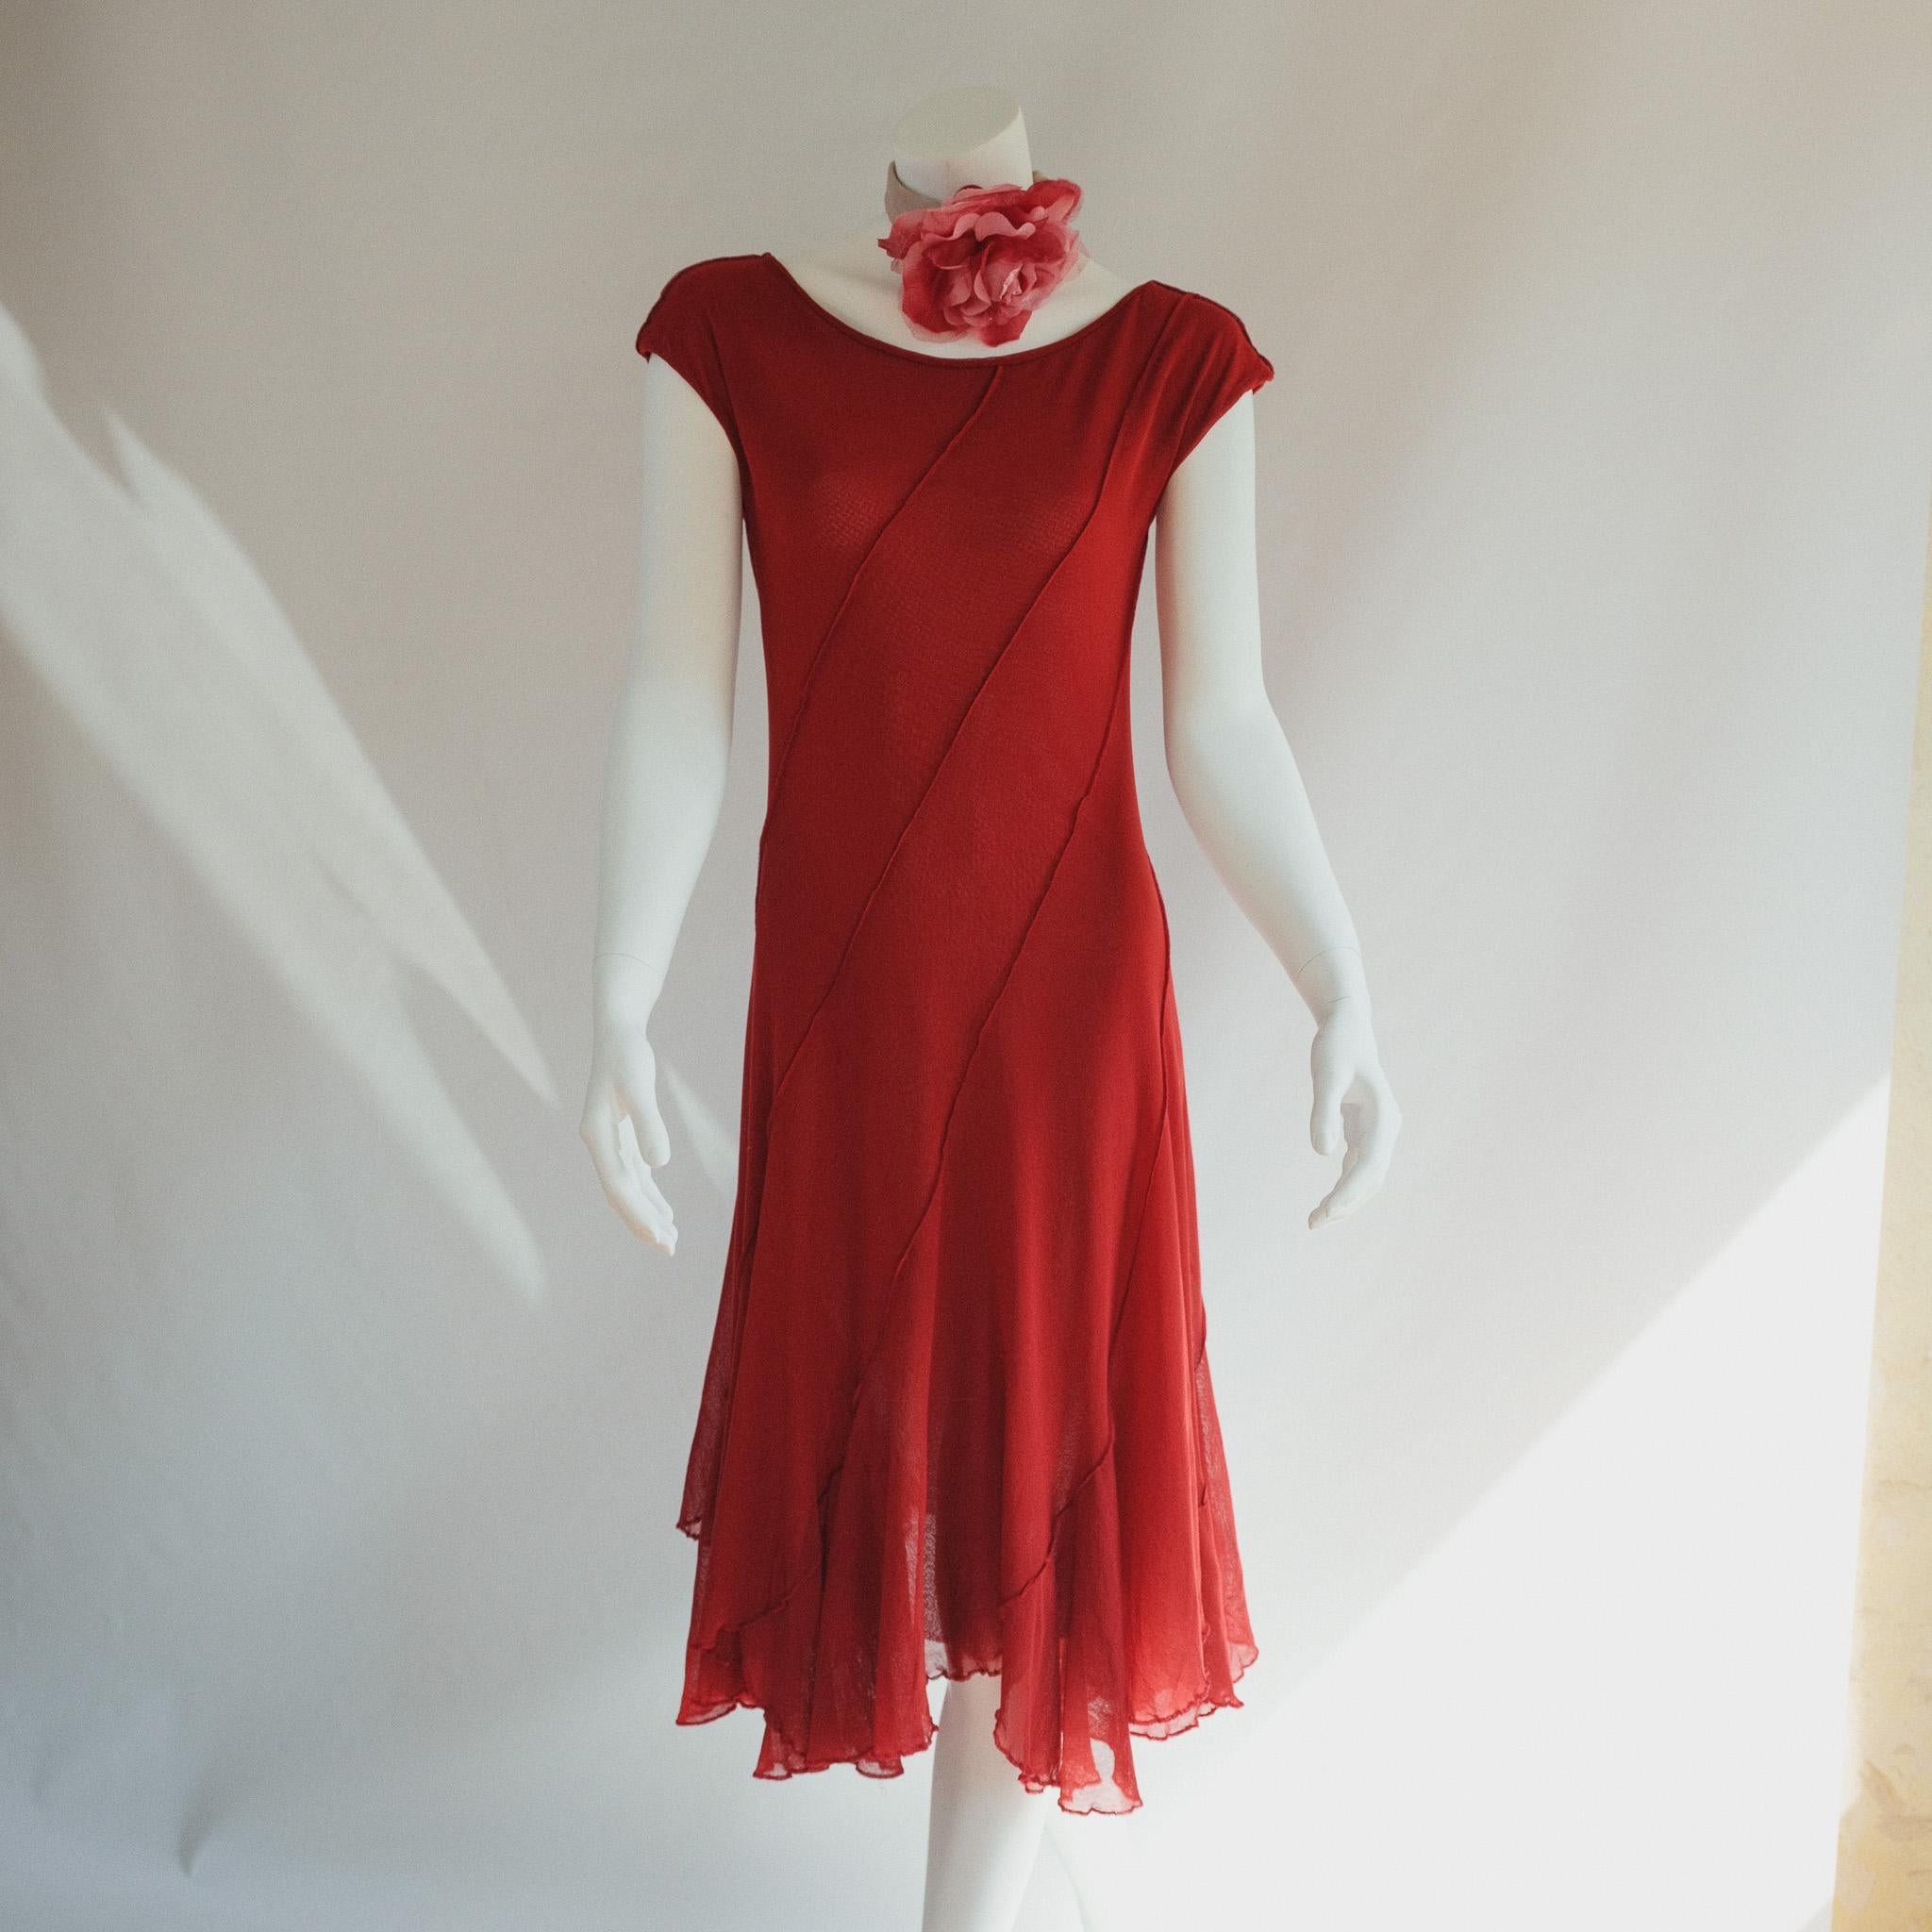 Jean Paul Gaultier Soleil Shift Dress Mesh Red 
Dress Deep burgundy red, semi sheer and midi finish. 
Yum 

Tag size S but is super flexible due to fabric and cut 
Pictured on size 6 5’5 and 14 with EE bust 
Good fit on 6-14 depending on desired fit